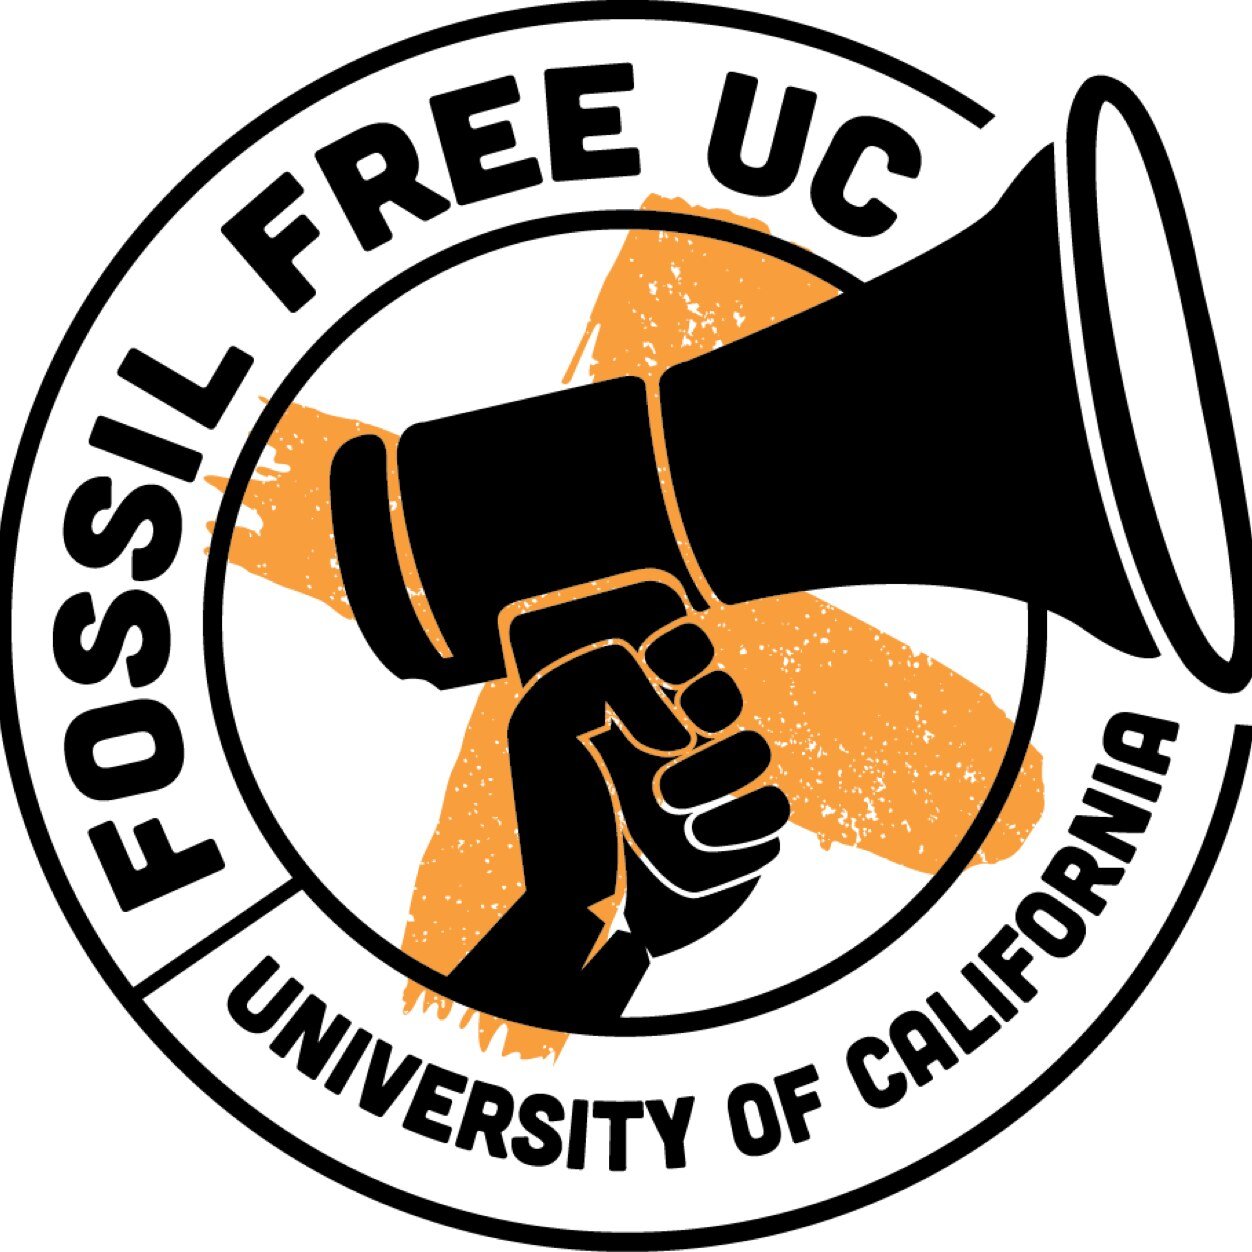 FFUC is a @CalSSC campaign to divest University of California's endowment funds from #DirtyFossilFuels to reinvest in a just  & sustainable future.